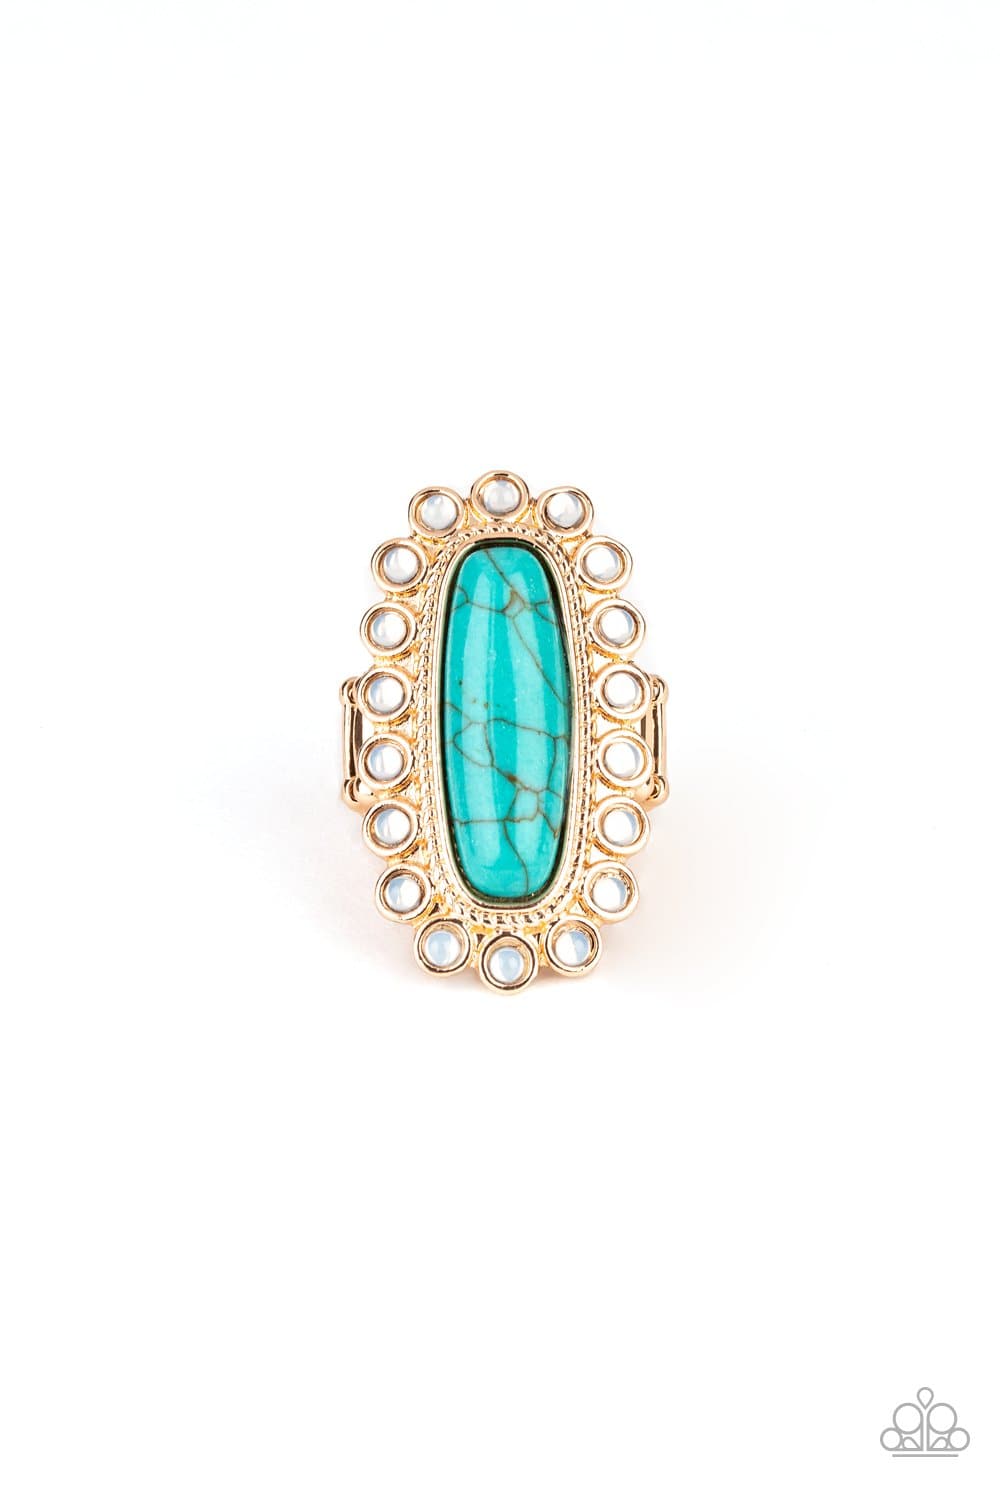 Mystic Oasis - Gold and Turquoise Stone Ring - Paparazzi Accessories - GlaMarous Titi Jewels